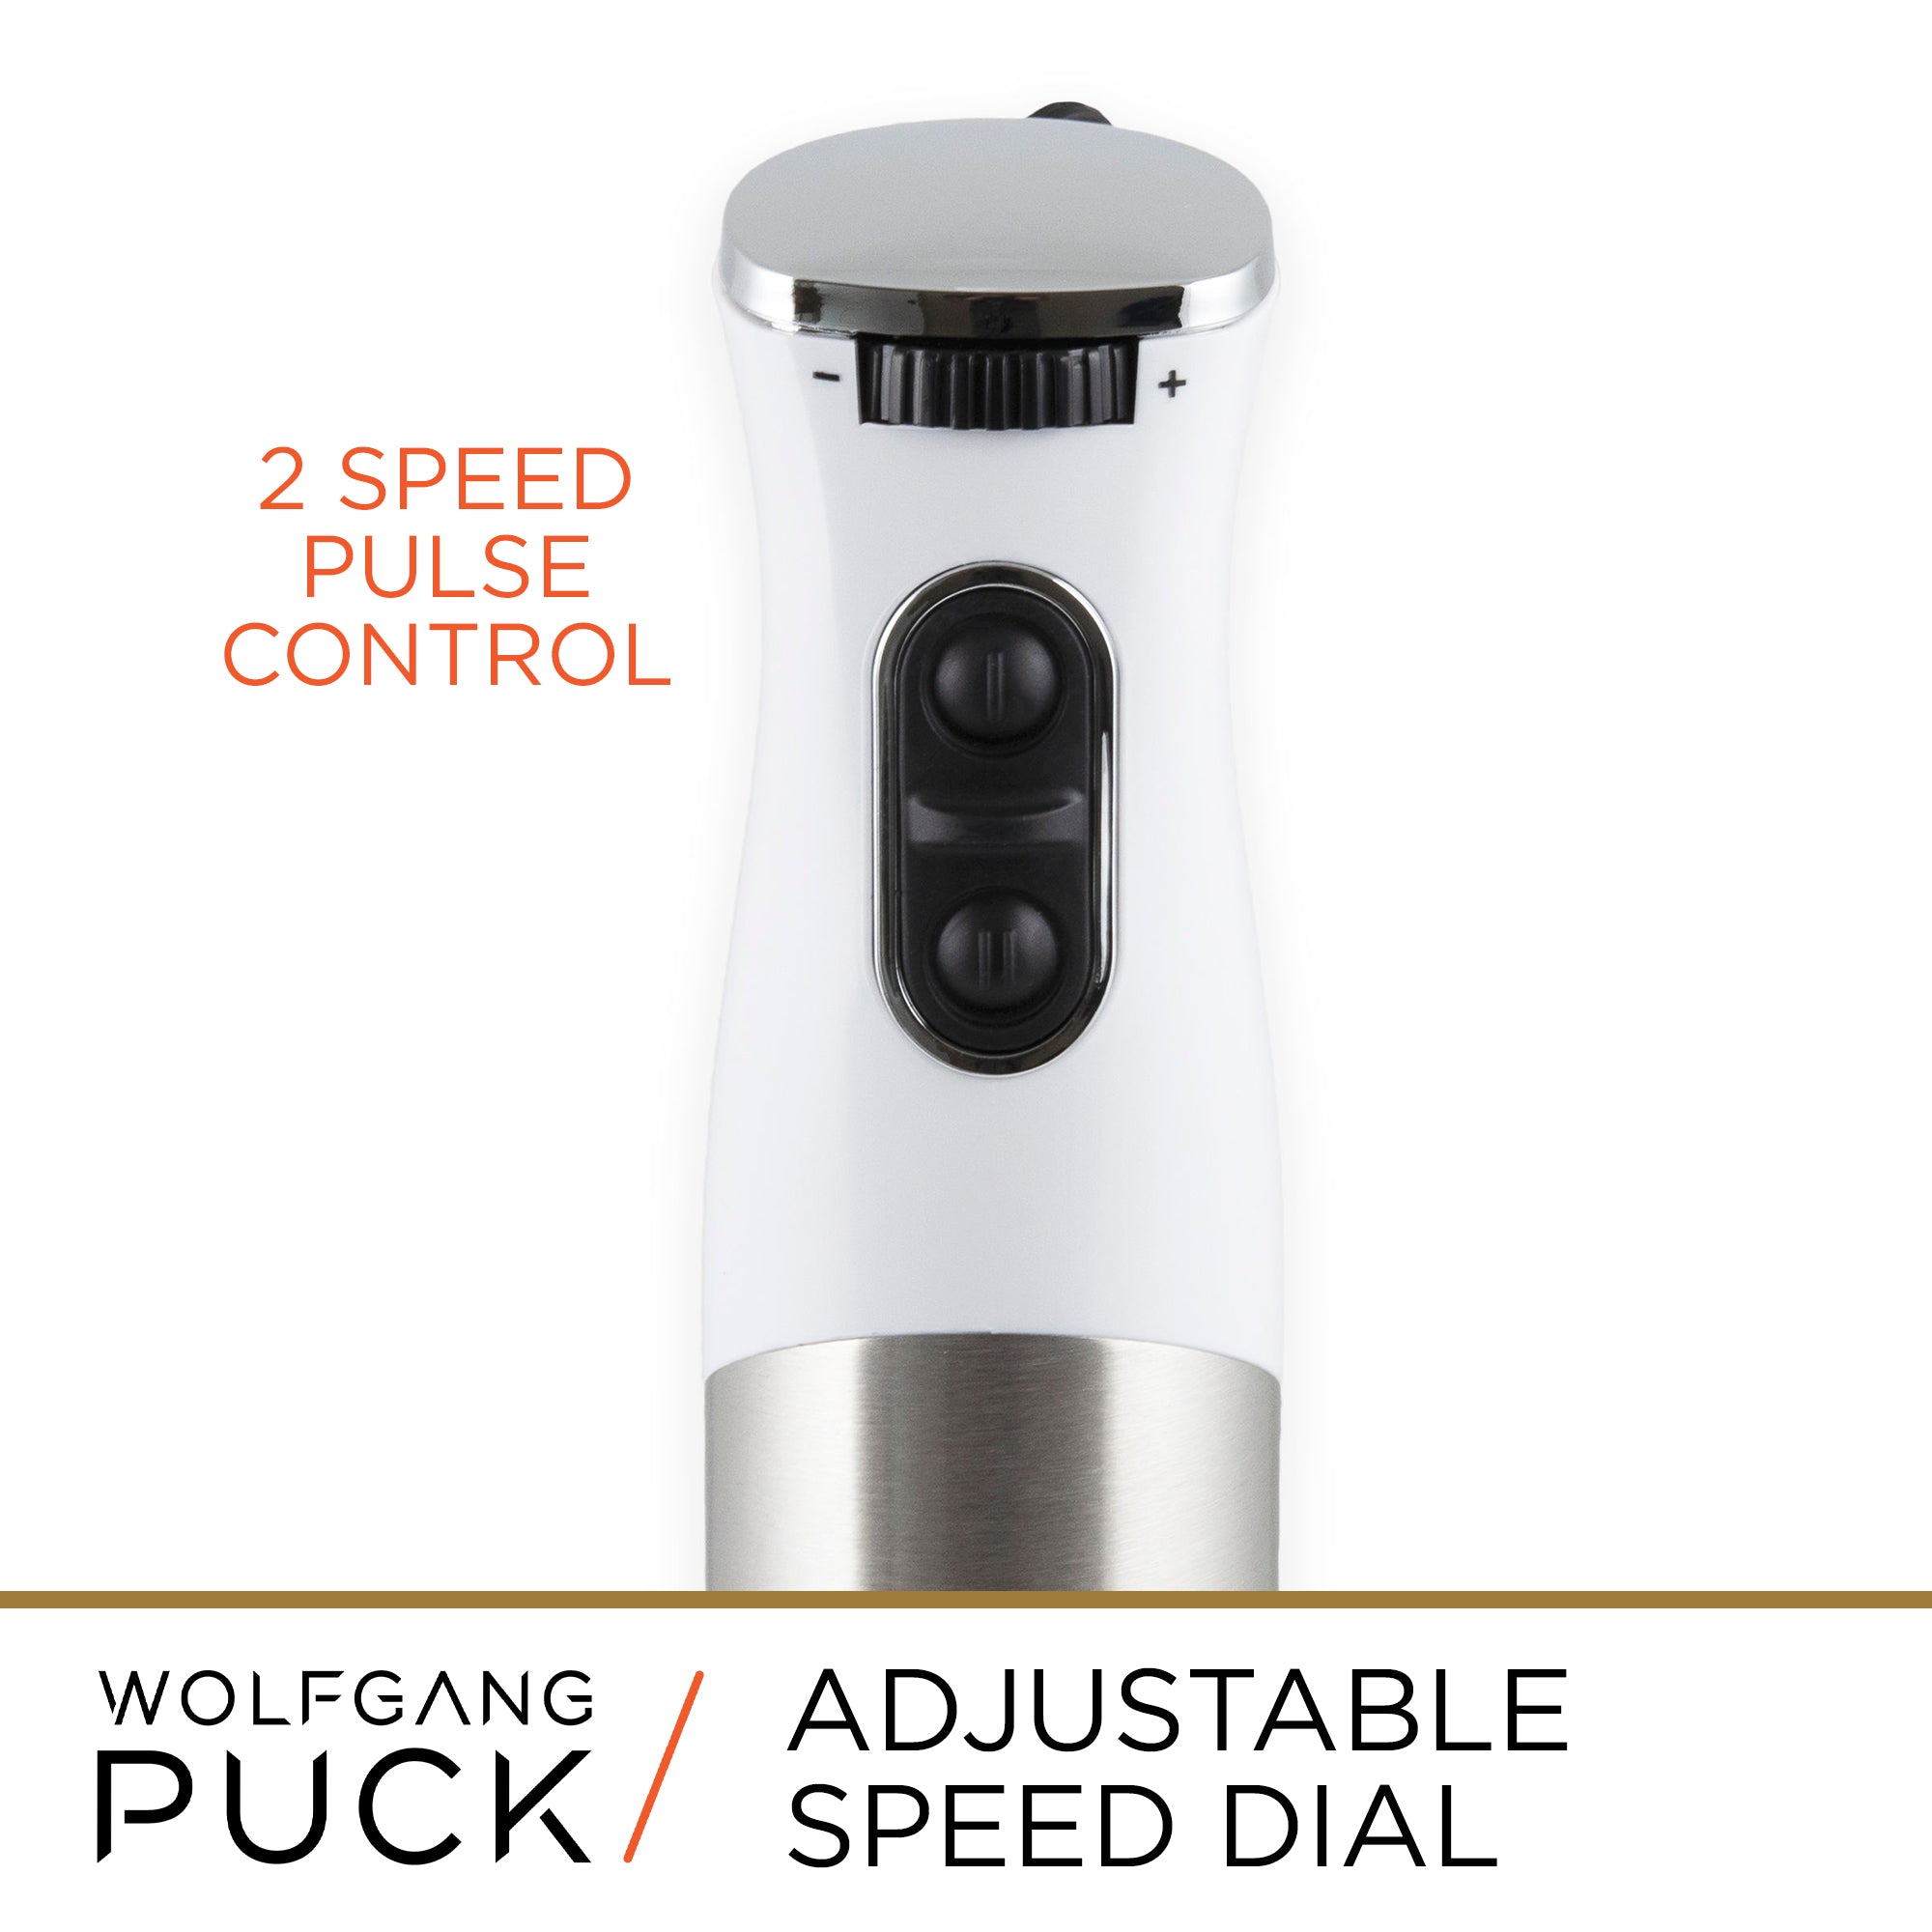 Immersion blender with 2-speed pulse control